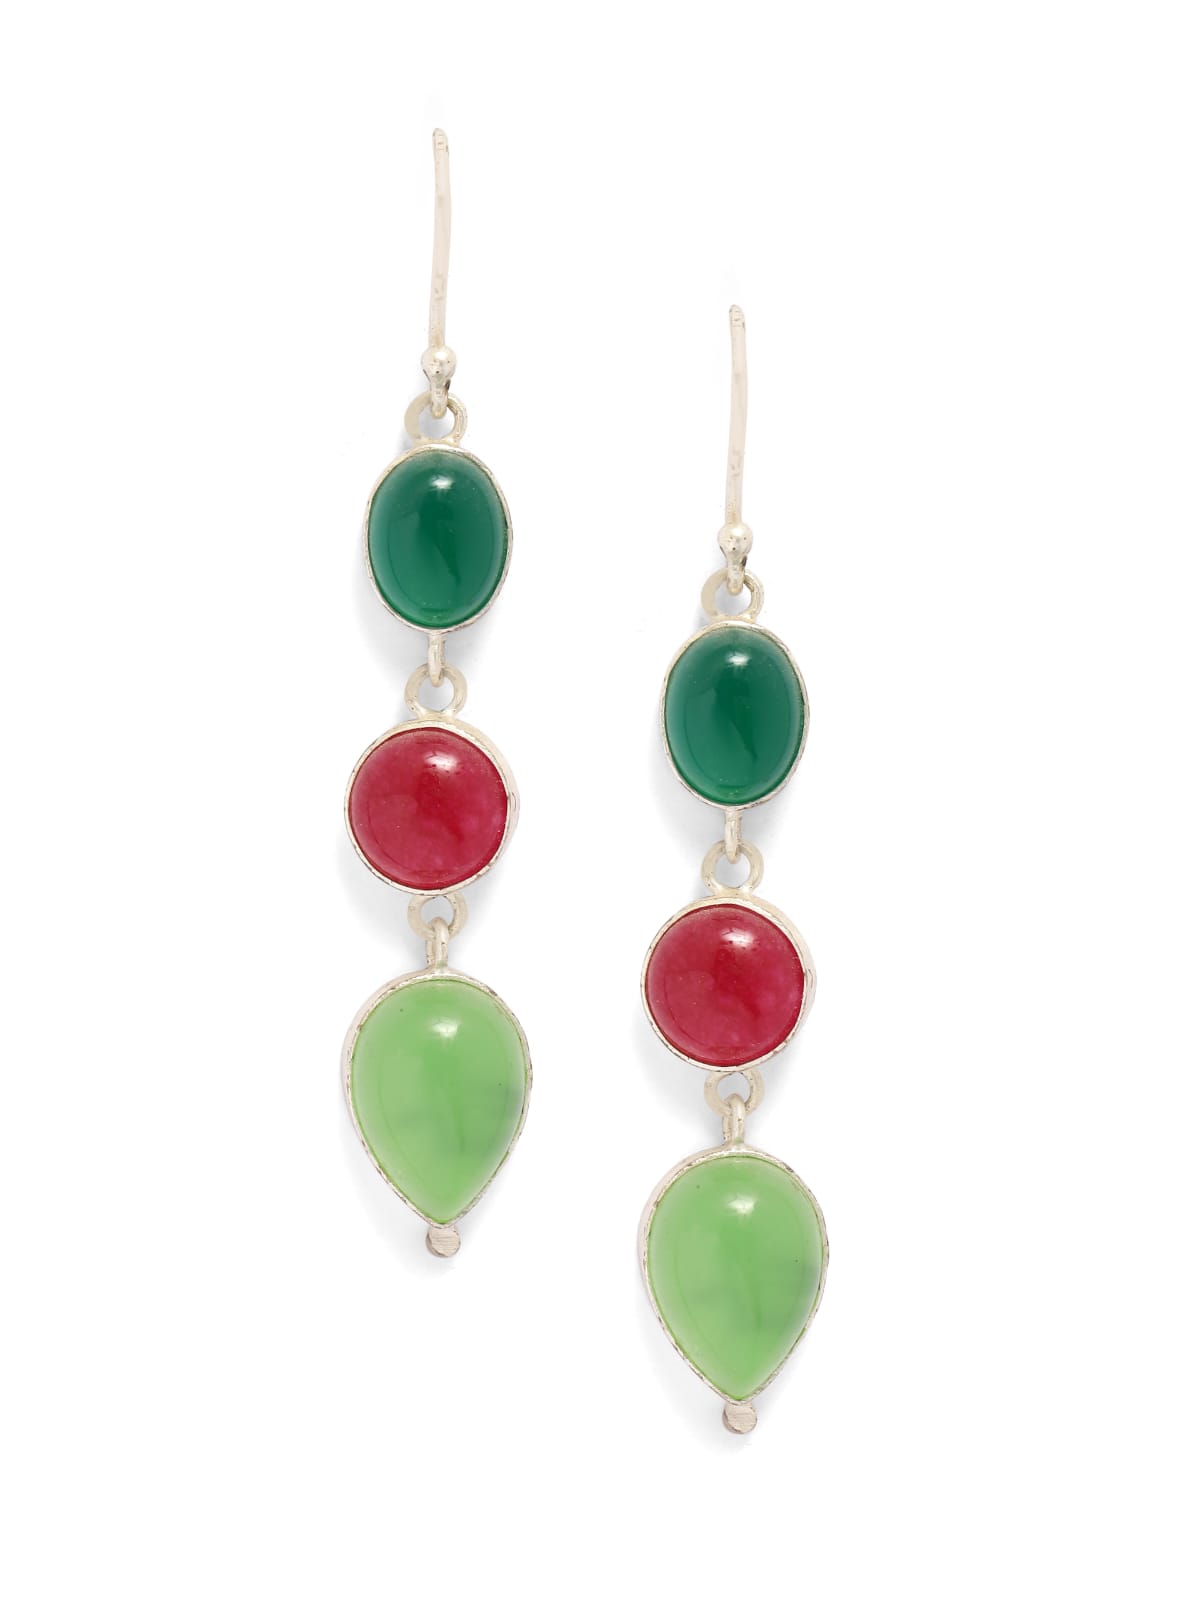 Sterling Silver hook earrings with double green Onyx, red Quartz and grapes Aventurine.